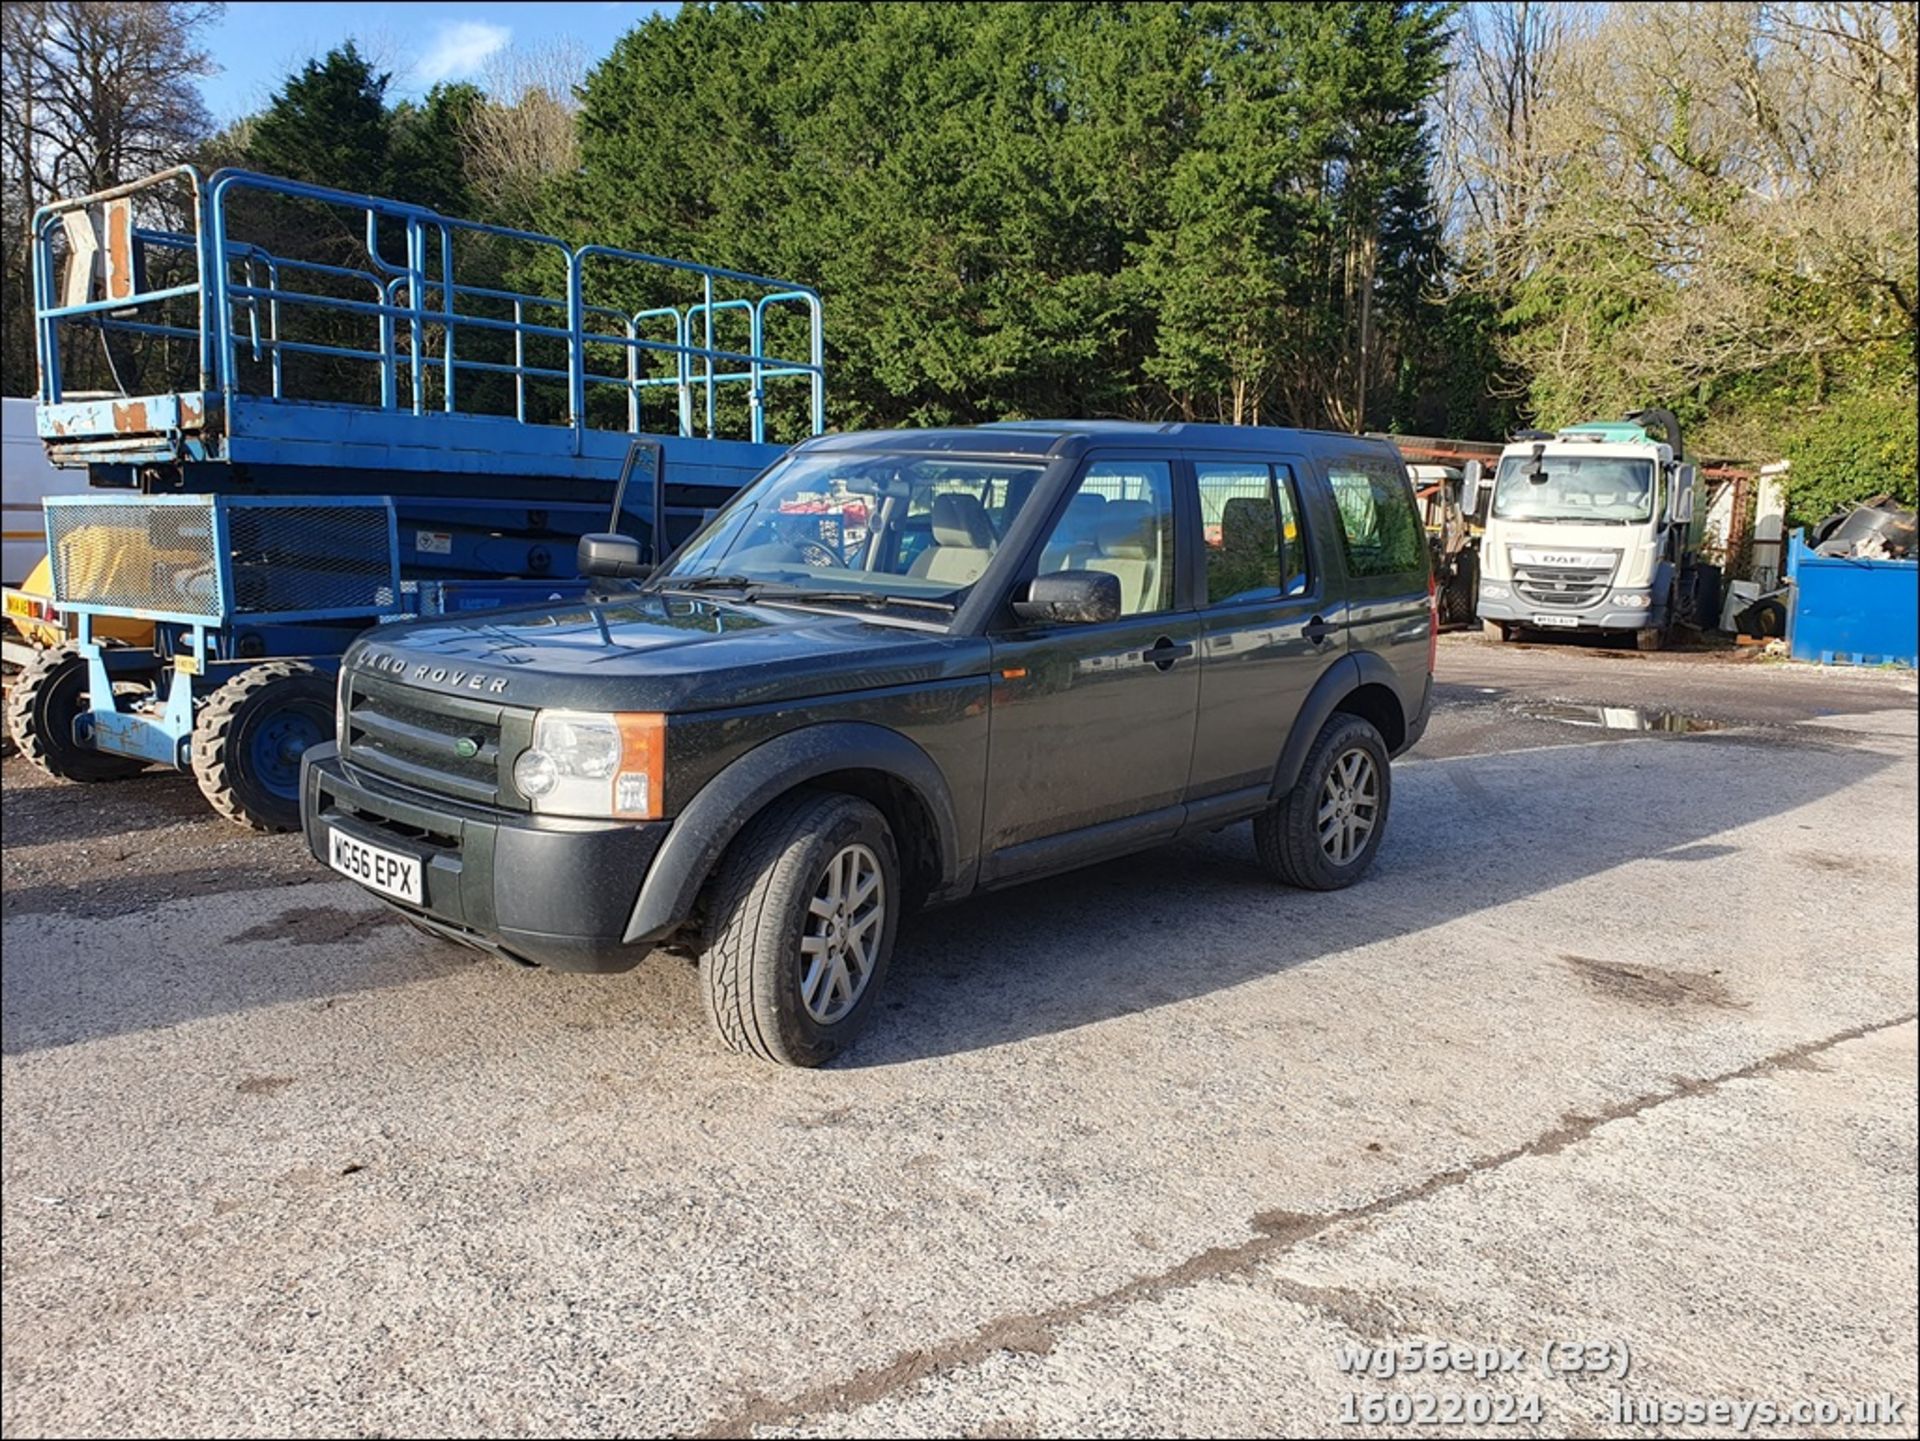 06/56 LAND ROVER DISCOVERY TDV6 GS - 2720cc 5dr Estate (Green) - Image 32 of 44